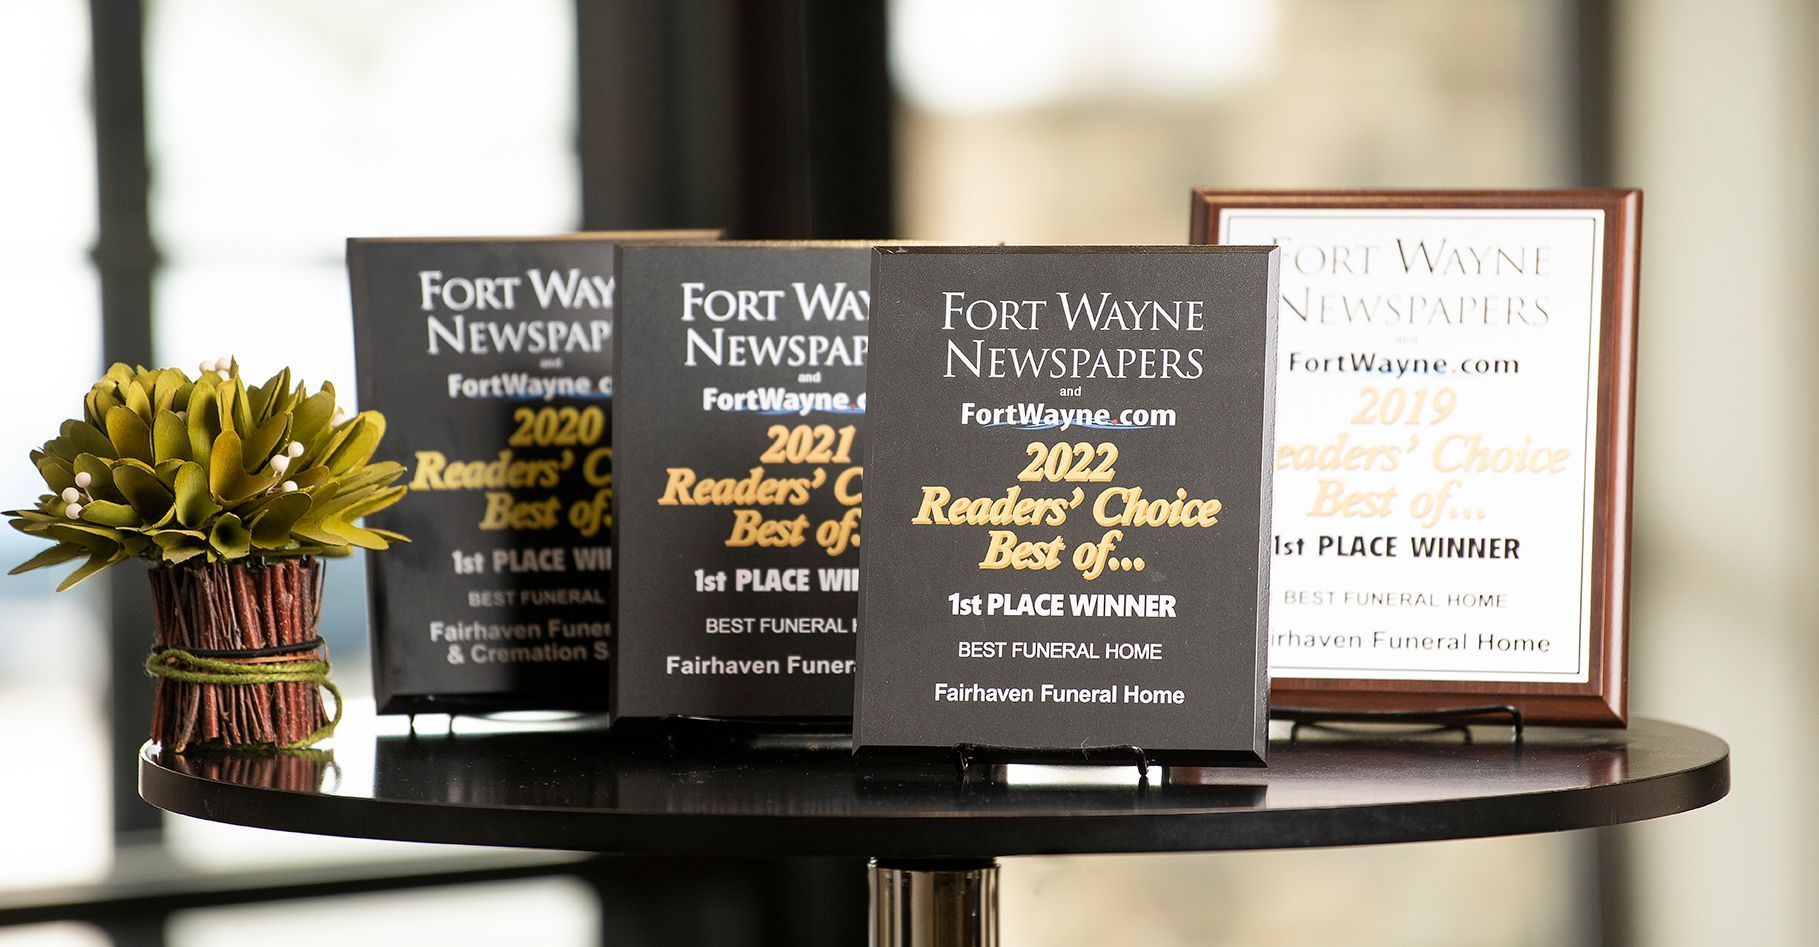 Best funeral home in Fort Wayne plaques indicating 1st place winner